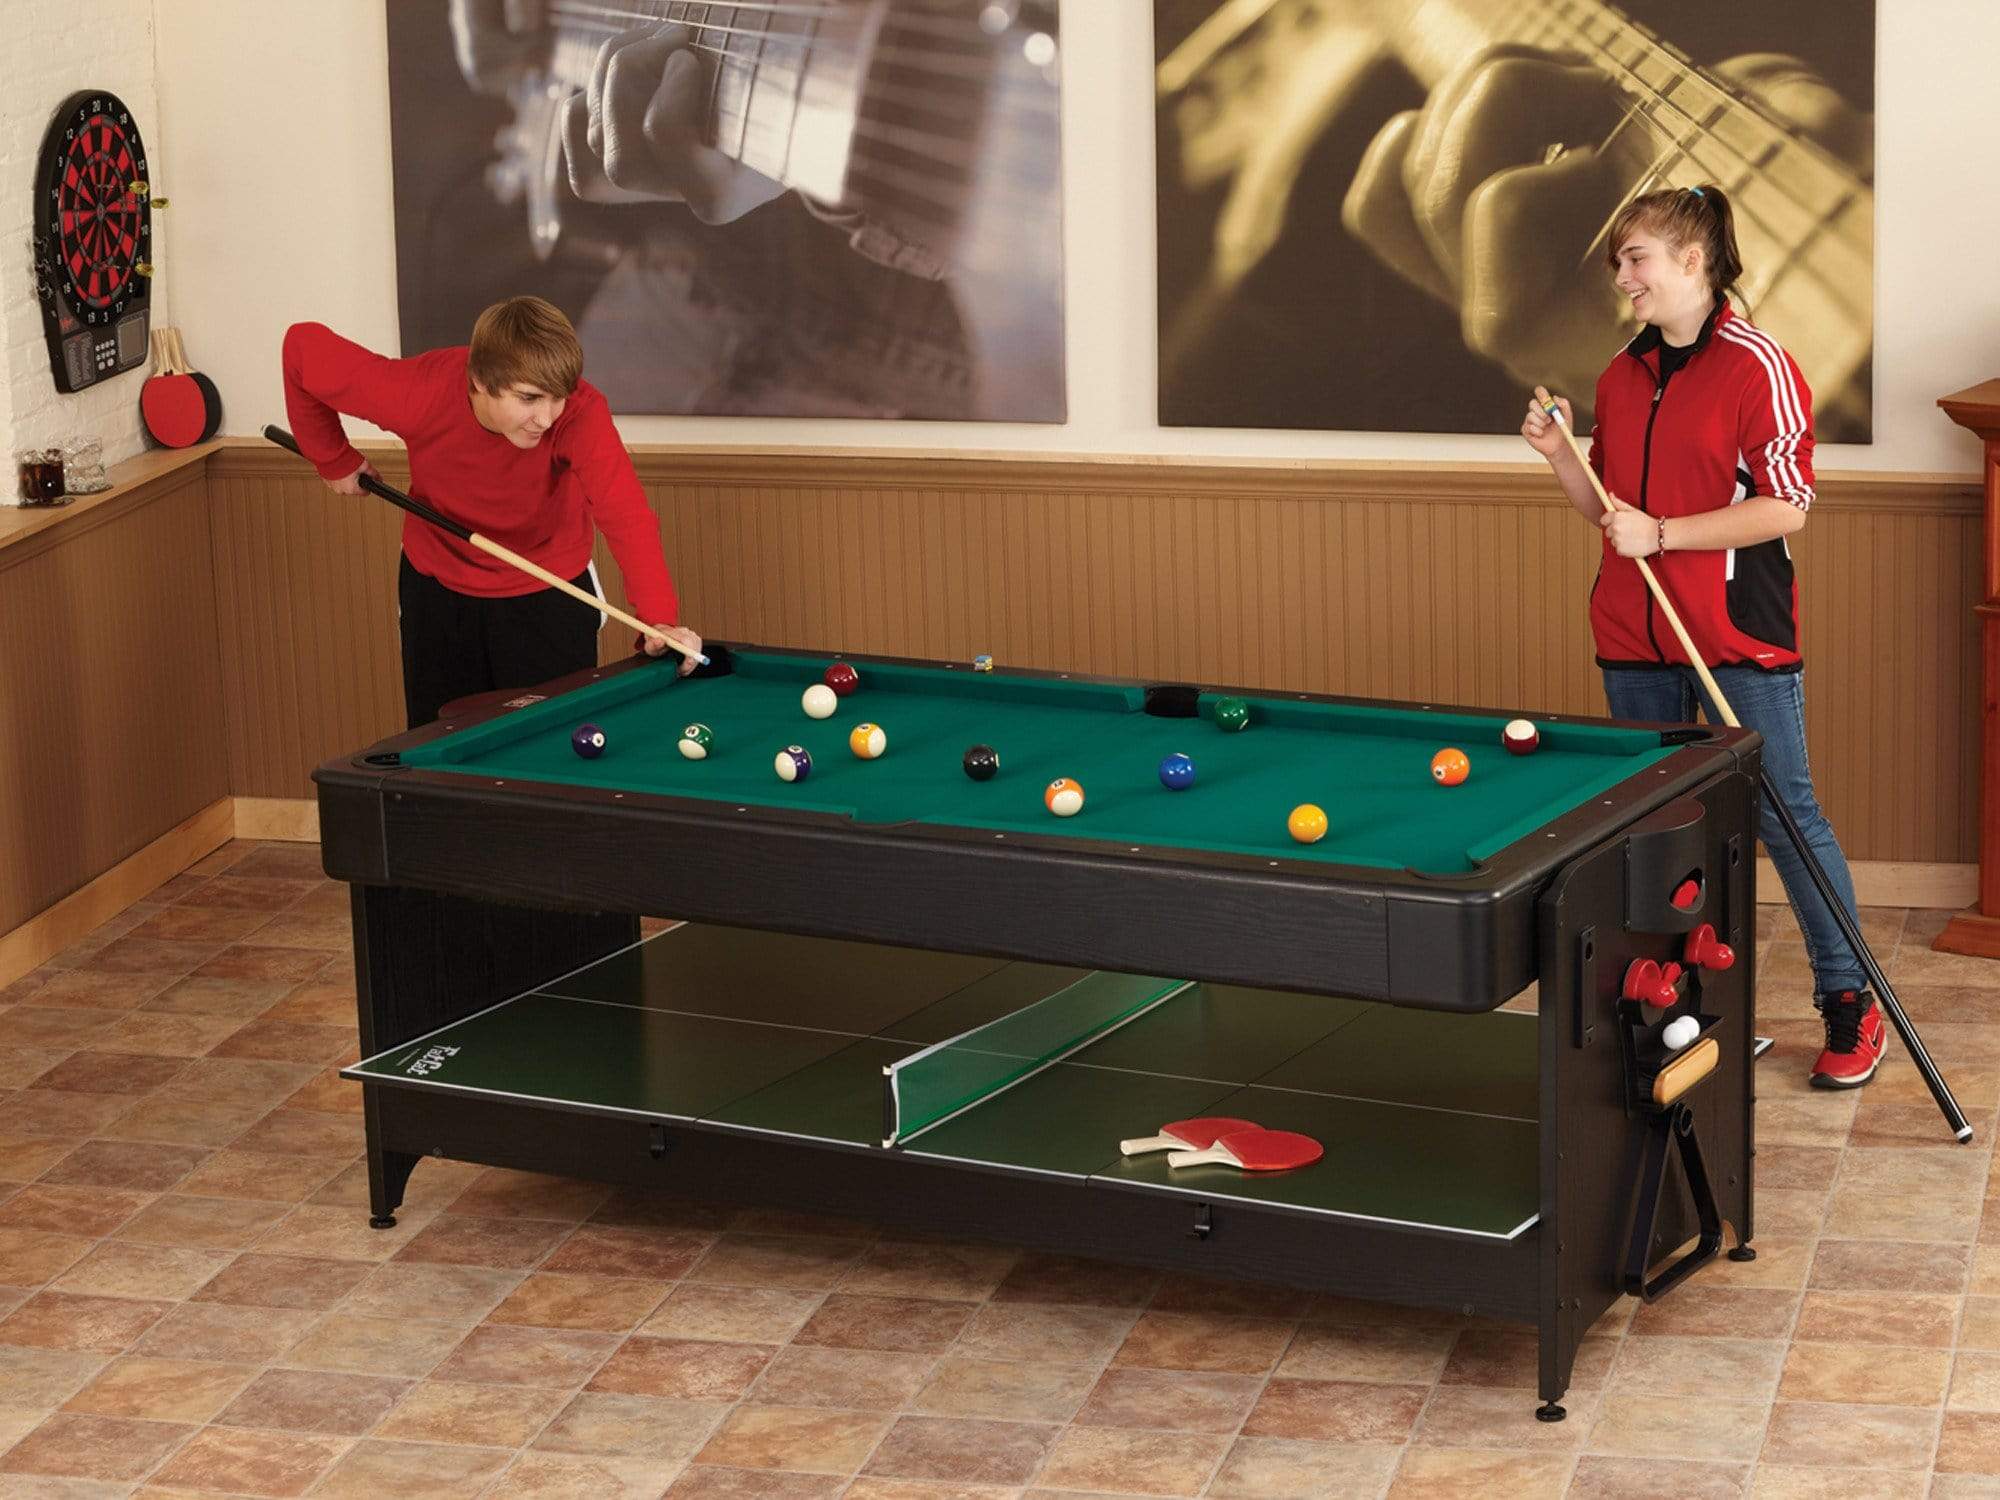 Pockey 3 in 1 Pool, Air Hockey & Ping Pong Table with Blue Cloth by FatCat  FREE SHIPPING